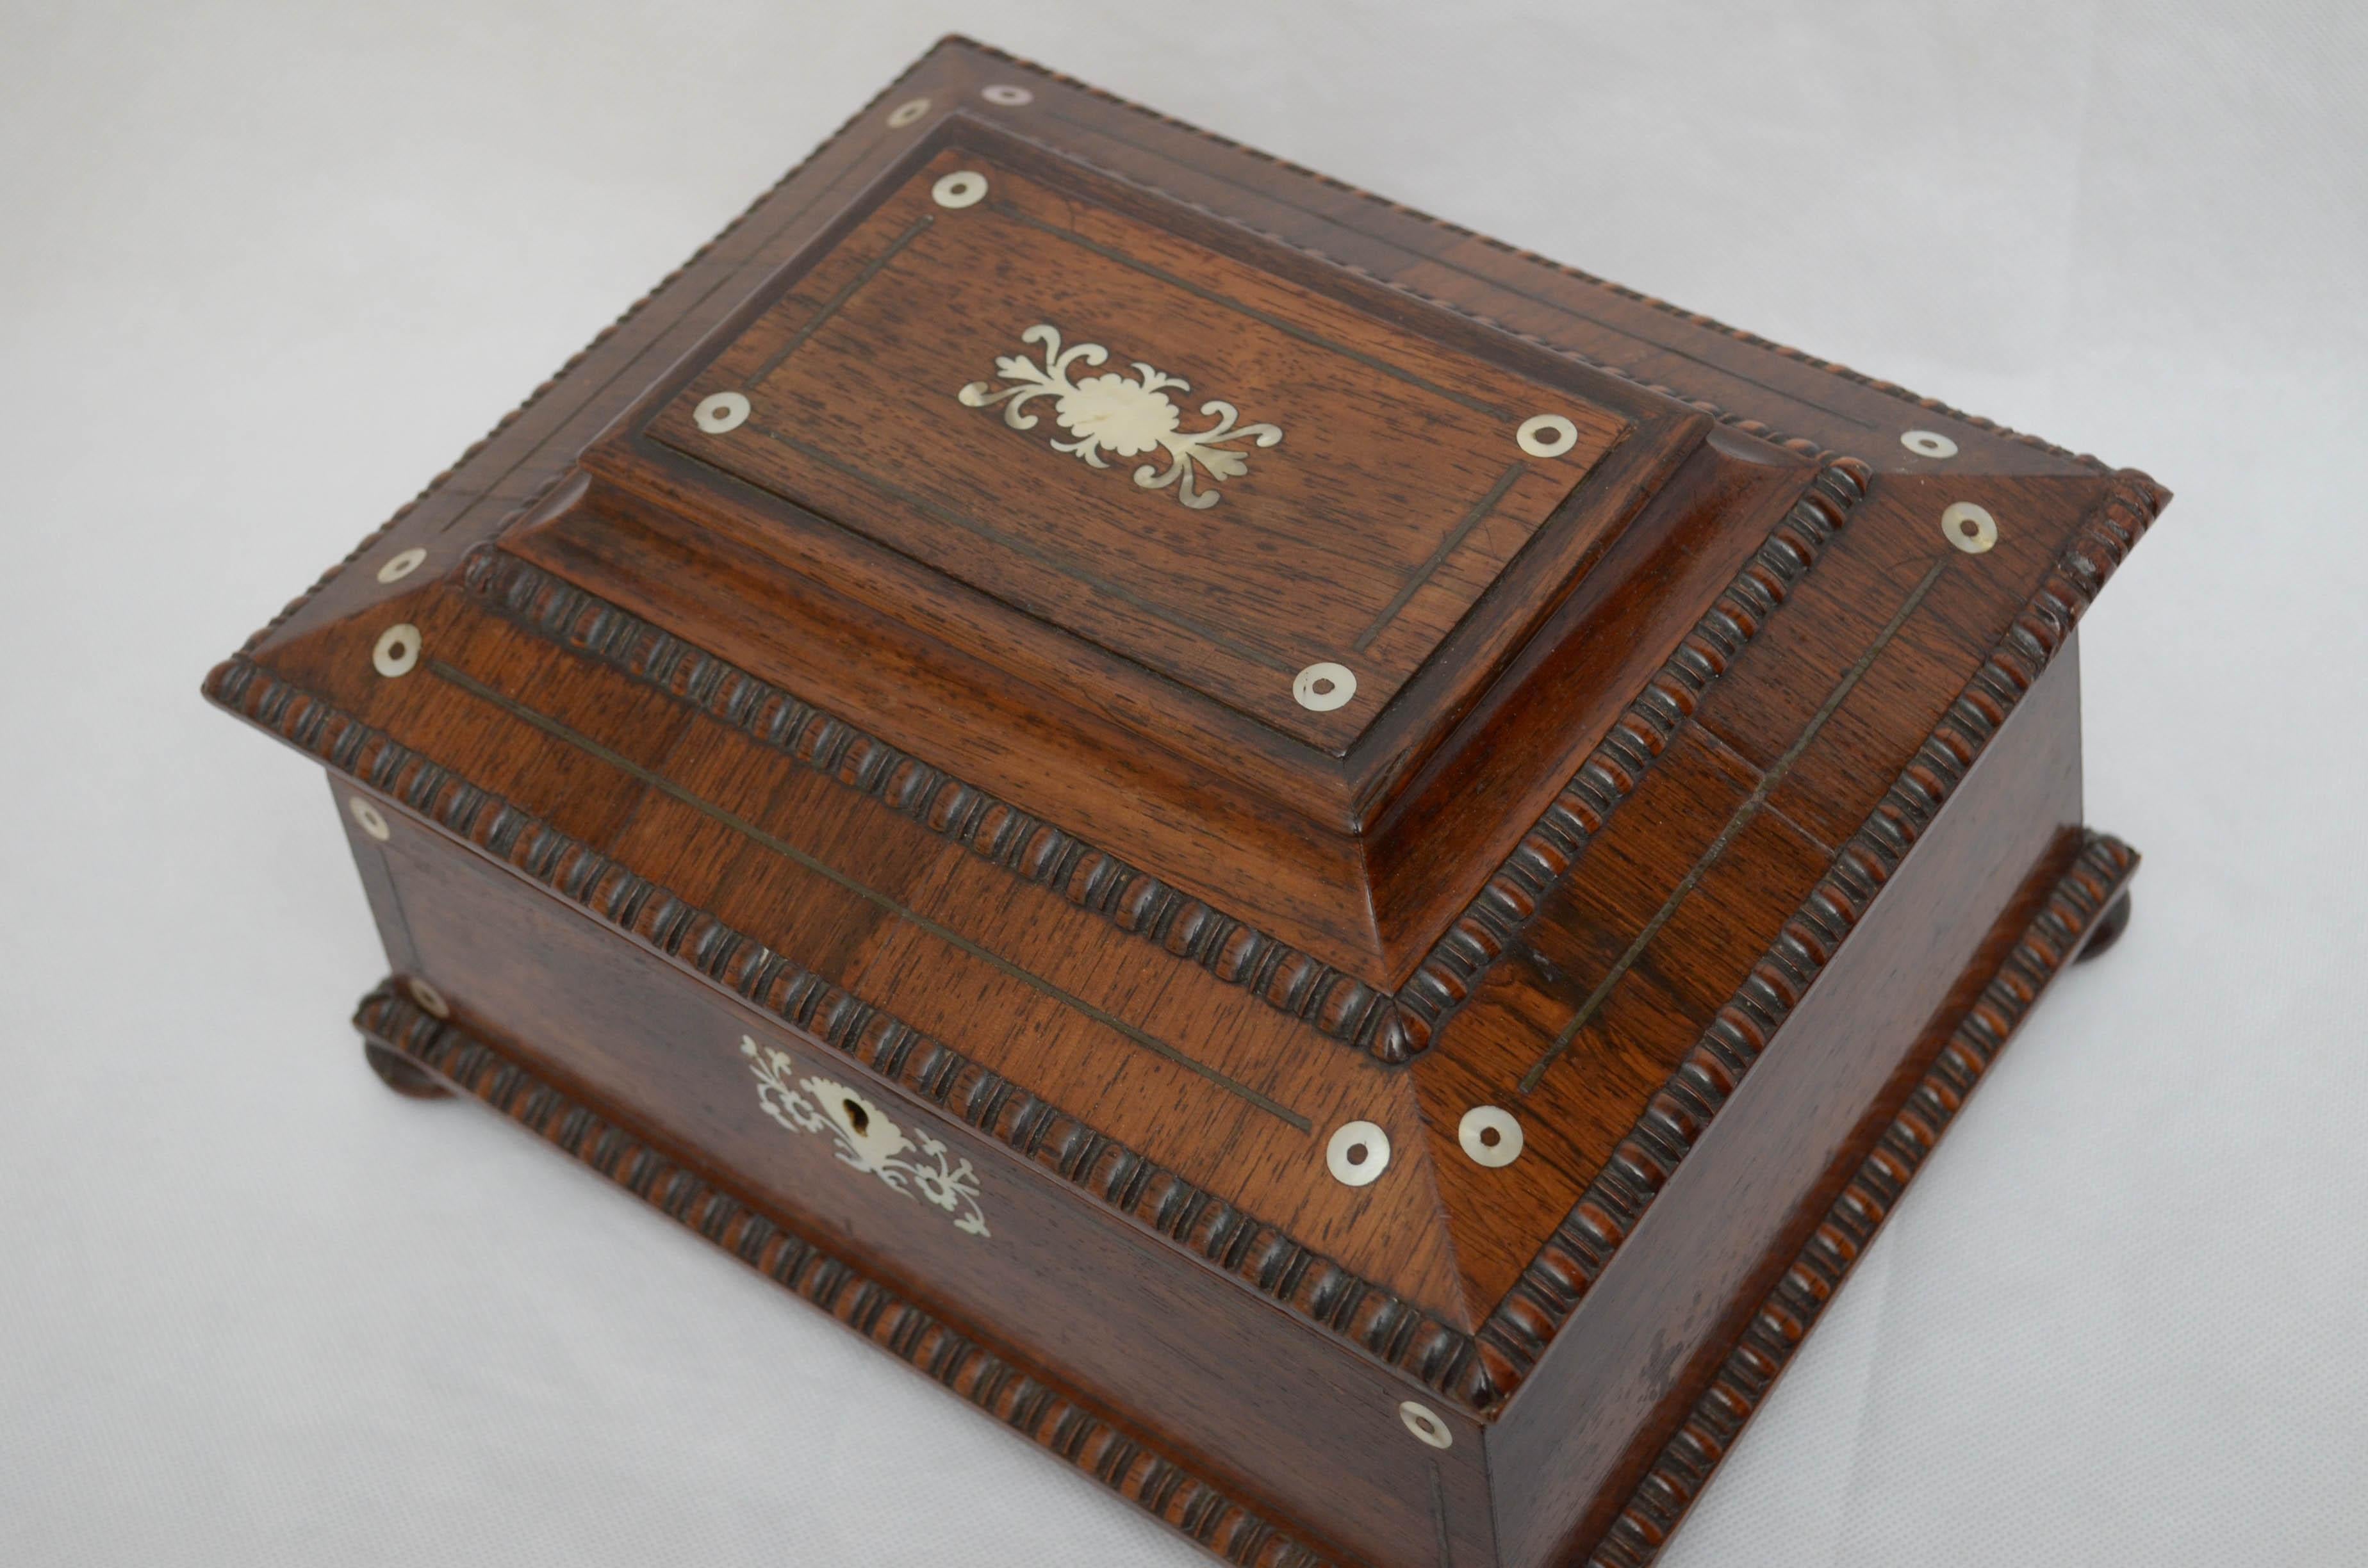 K0123, stunning William IV rosewood work box / jewelry box, having quadrant beading ad mother of pearl inlaid to the front and to the hinged top which opens to reveal relined interior with a lift up tray, all standing on bun feet. This antique box